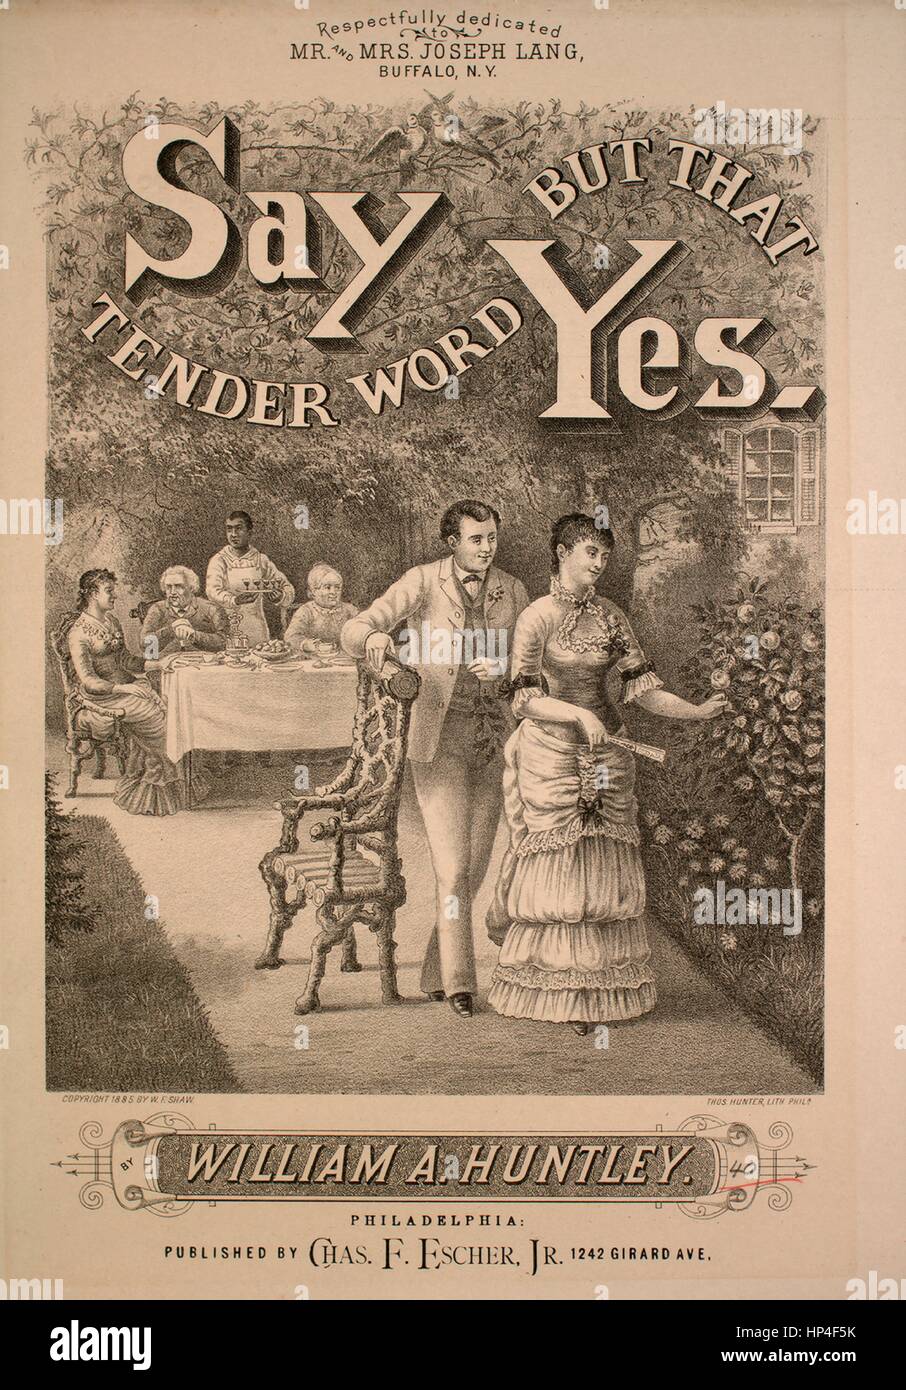 Sheet music cover image of the song 'Say But That Tender Word, Yes', with original authorship notes reading 'Words by Ernest Hardenstein Music by William A Huntley', United States, 1885. The publisher is listed as 'Chas. F. Escher, Jr., 1242 Girard Ave.', the form of composition is 'strophic with chorus', the instrumentation is 'piano and voice (solo and satb chorus)', the first line reads 'As to the idol fondly kneels, the pagan at its shrine', and the illustration artist is listed as 'Thos. Hunter, Lith. Phila.; Wm. H. Keyser and Co., Music Typographers, 921 Arch St., Phila.'. Stock Photo